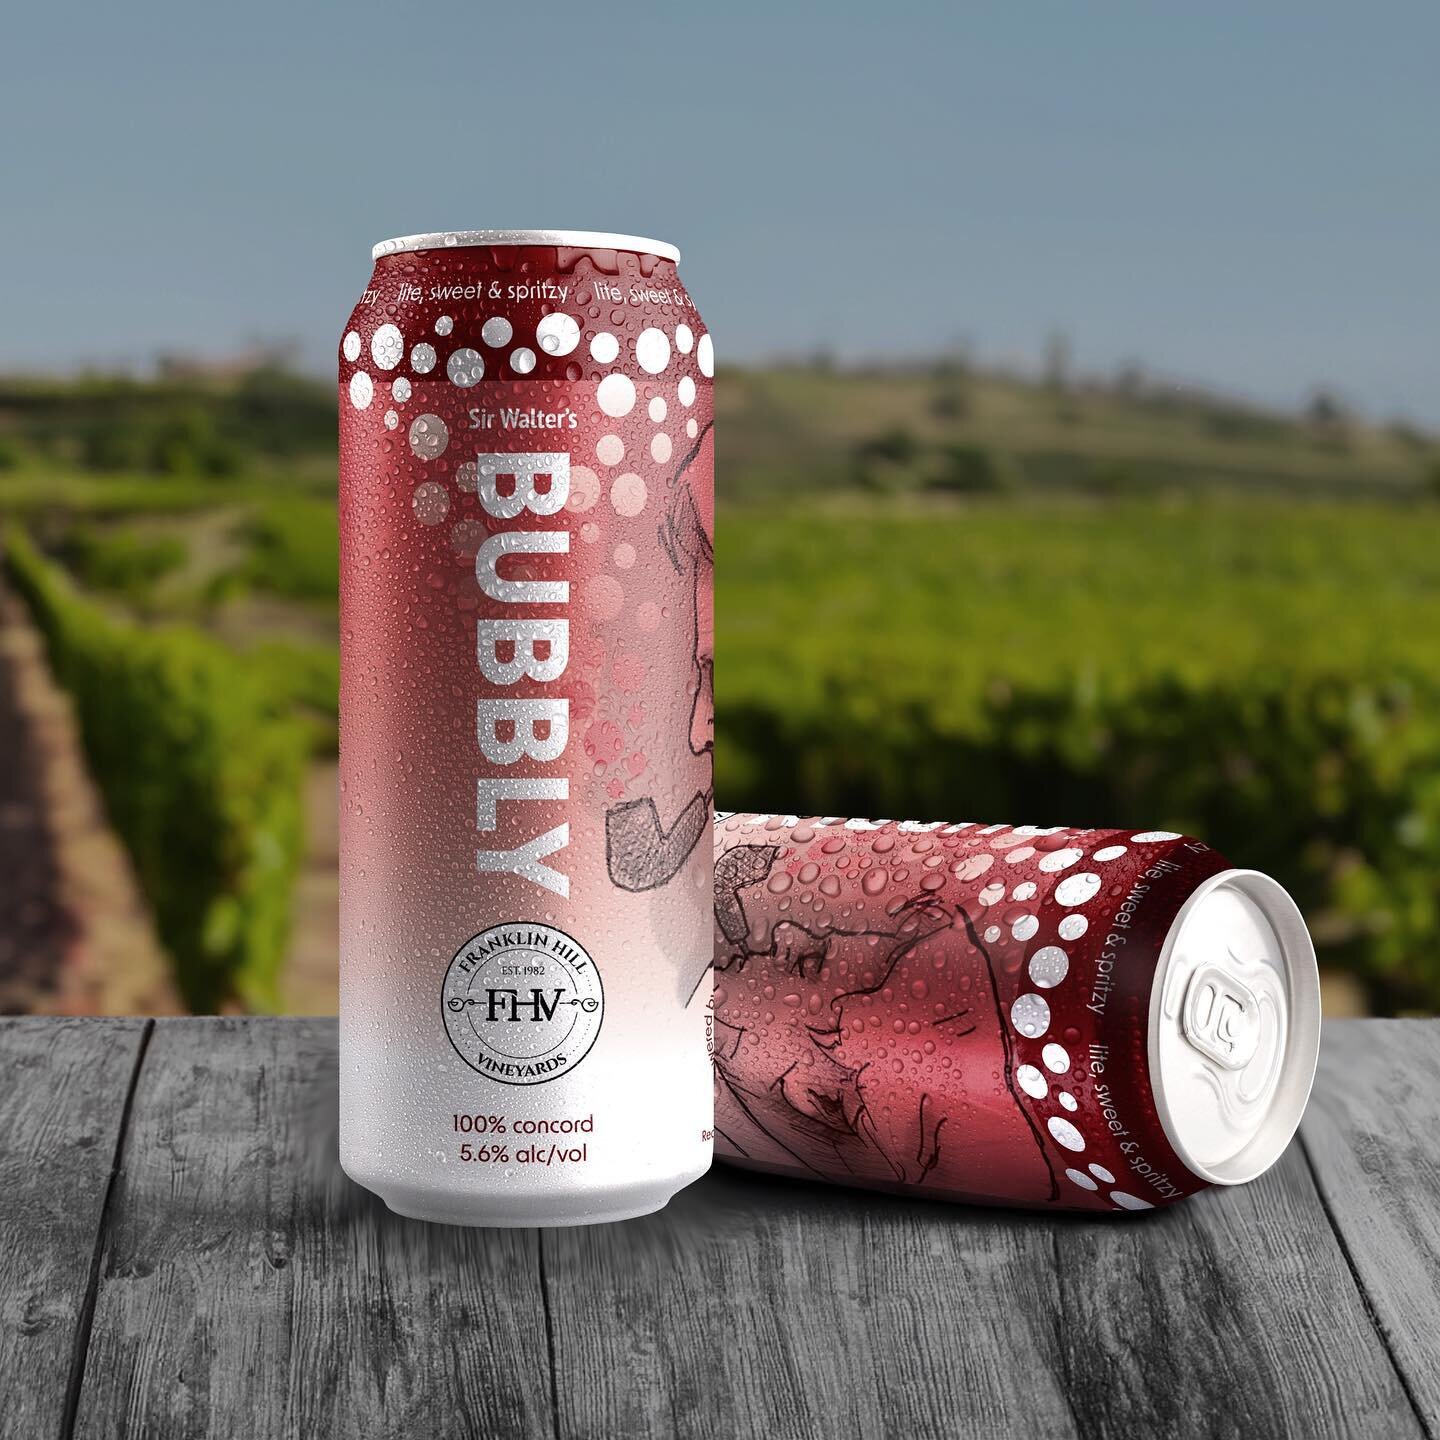 We were so excited when @franklinhillvin came to us about designing the label for their new canned Bubbly. They spritzed up their popular Sir Walter&rsquo;s Red, and wanted to use the illustration from the original bottle label. We decided to keep it